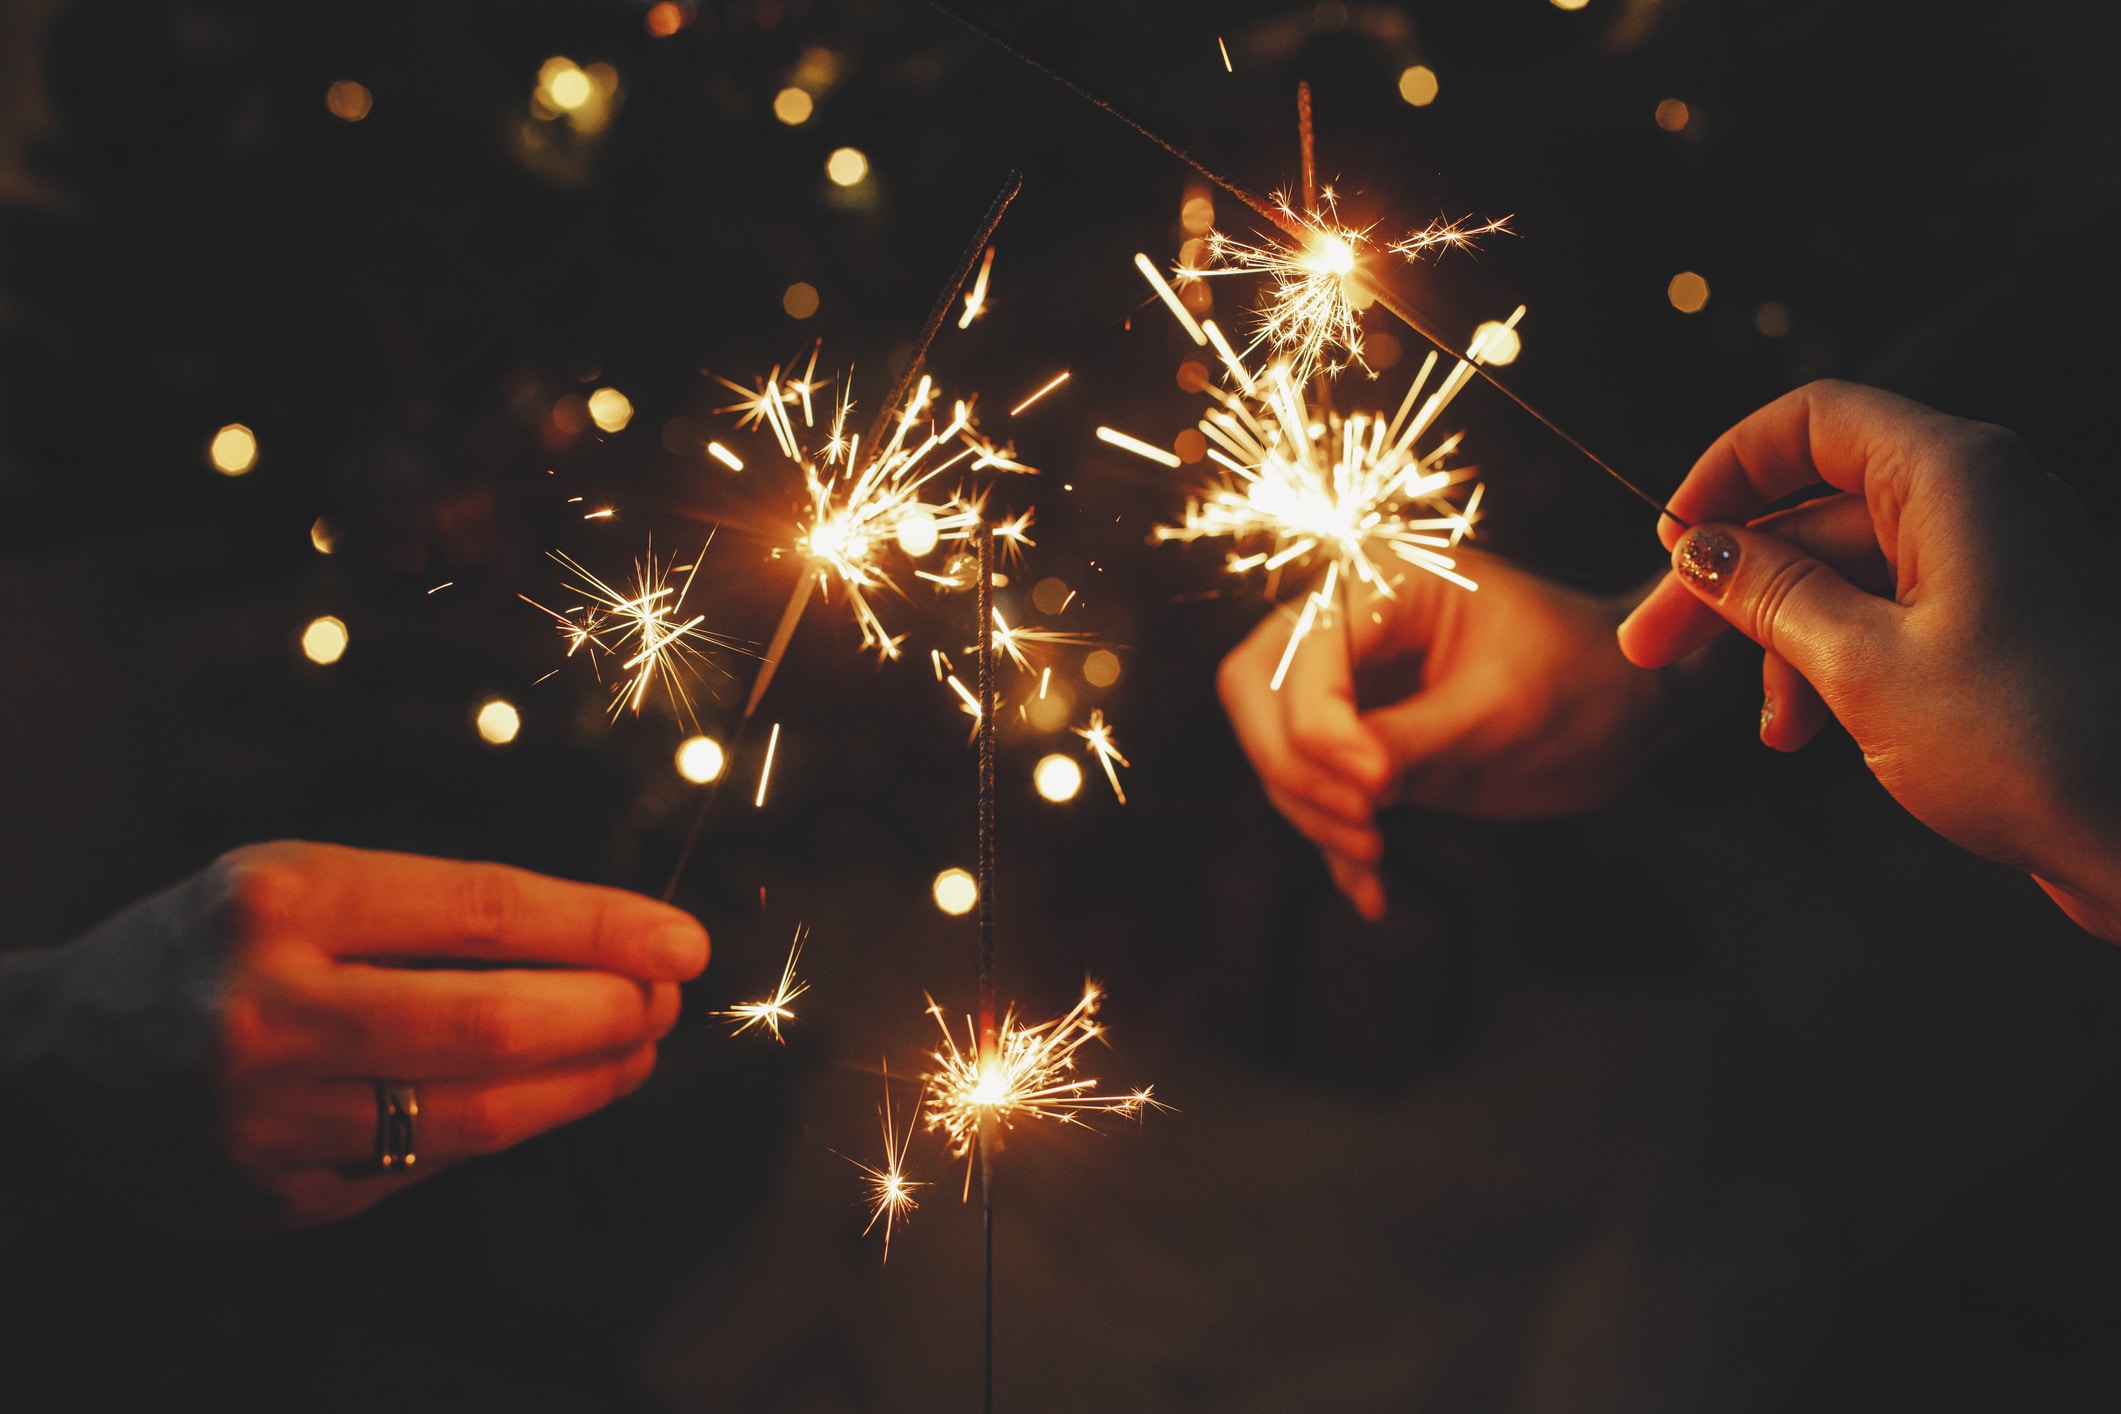 New Year's resolutions, friends celebrating with sparklers in hands.